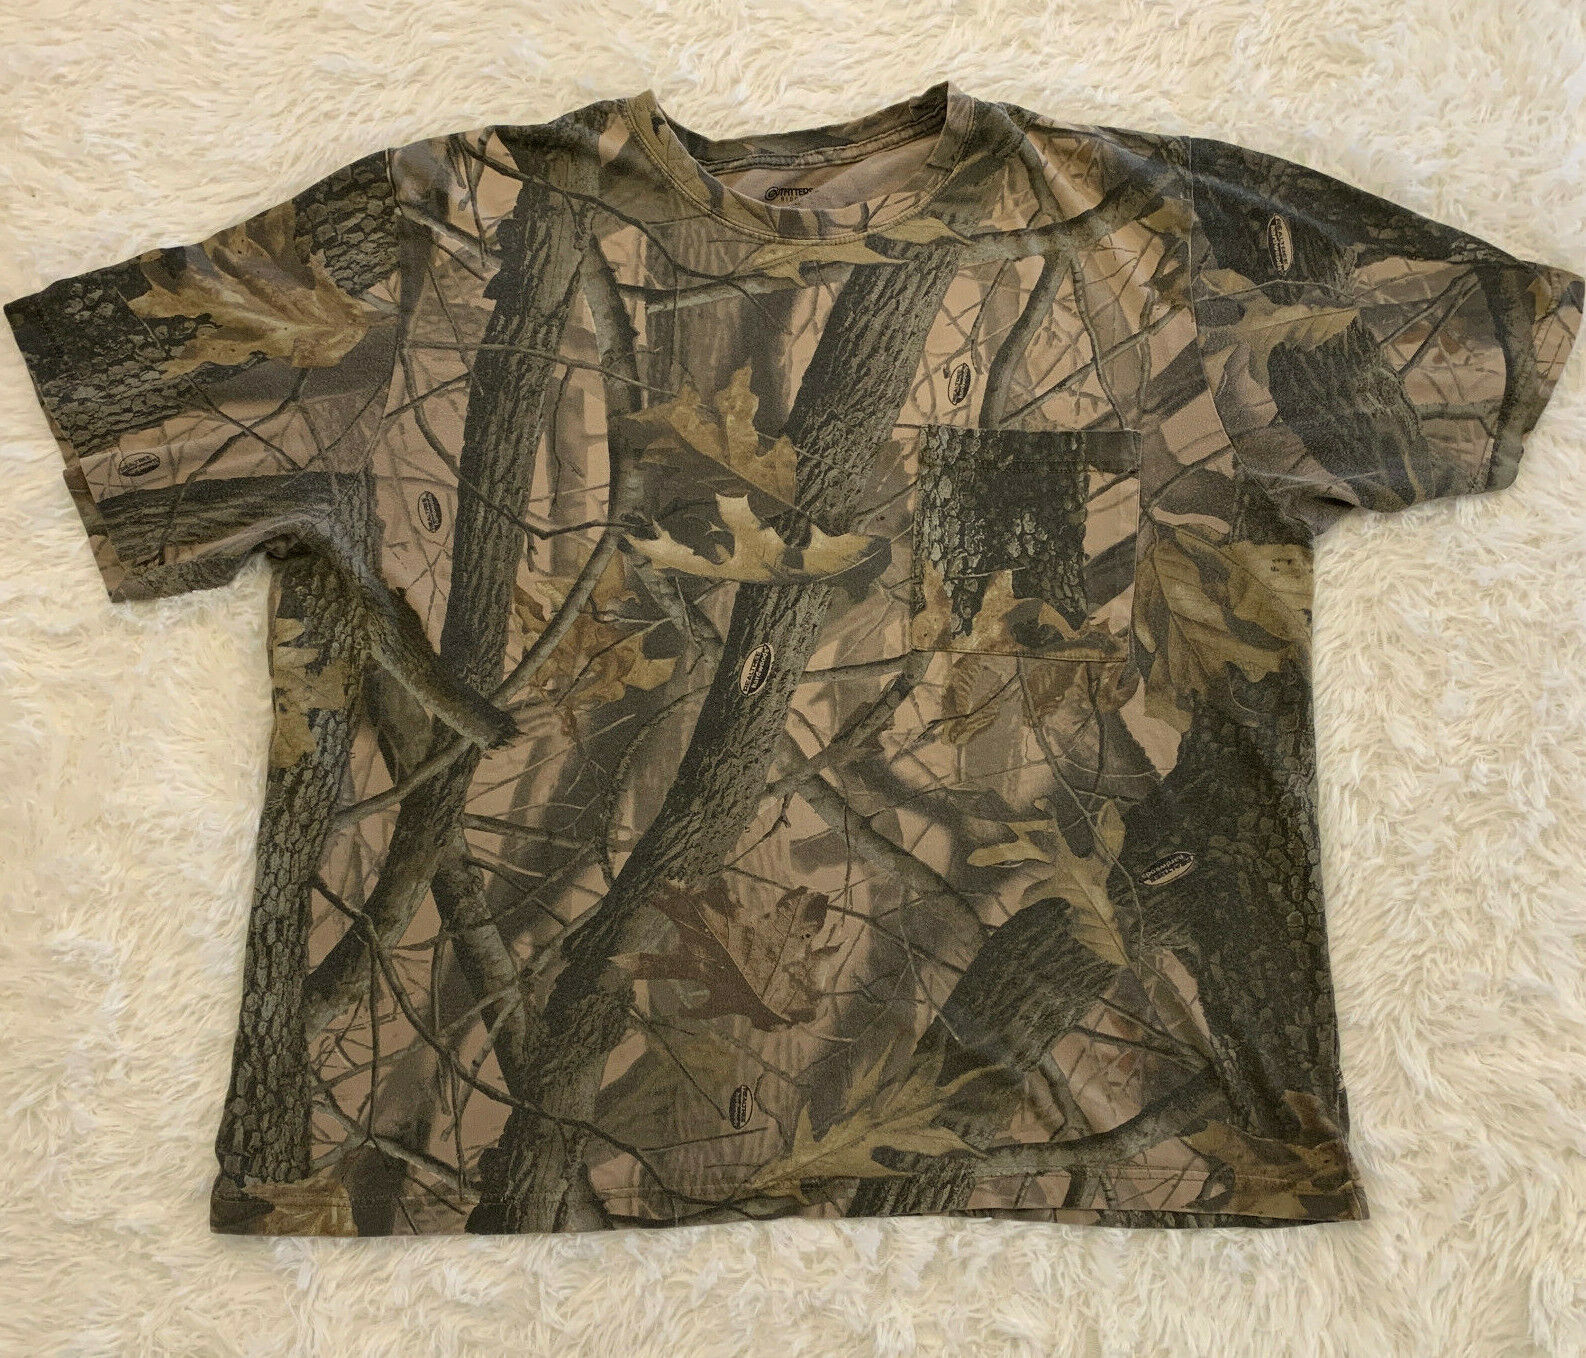 Outfitters Ridge Shirt Adult XL Camo Camouflage Hunting Realtree 3D Pocket Mens